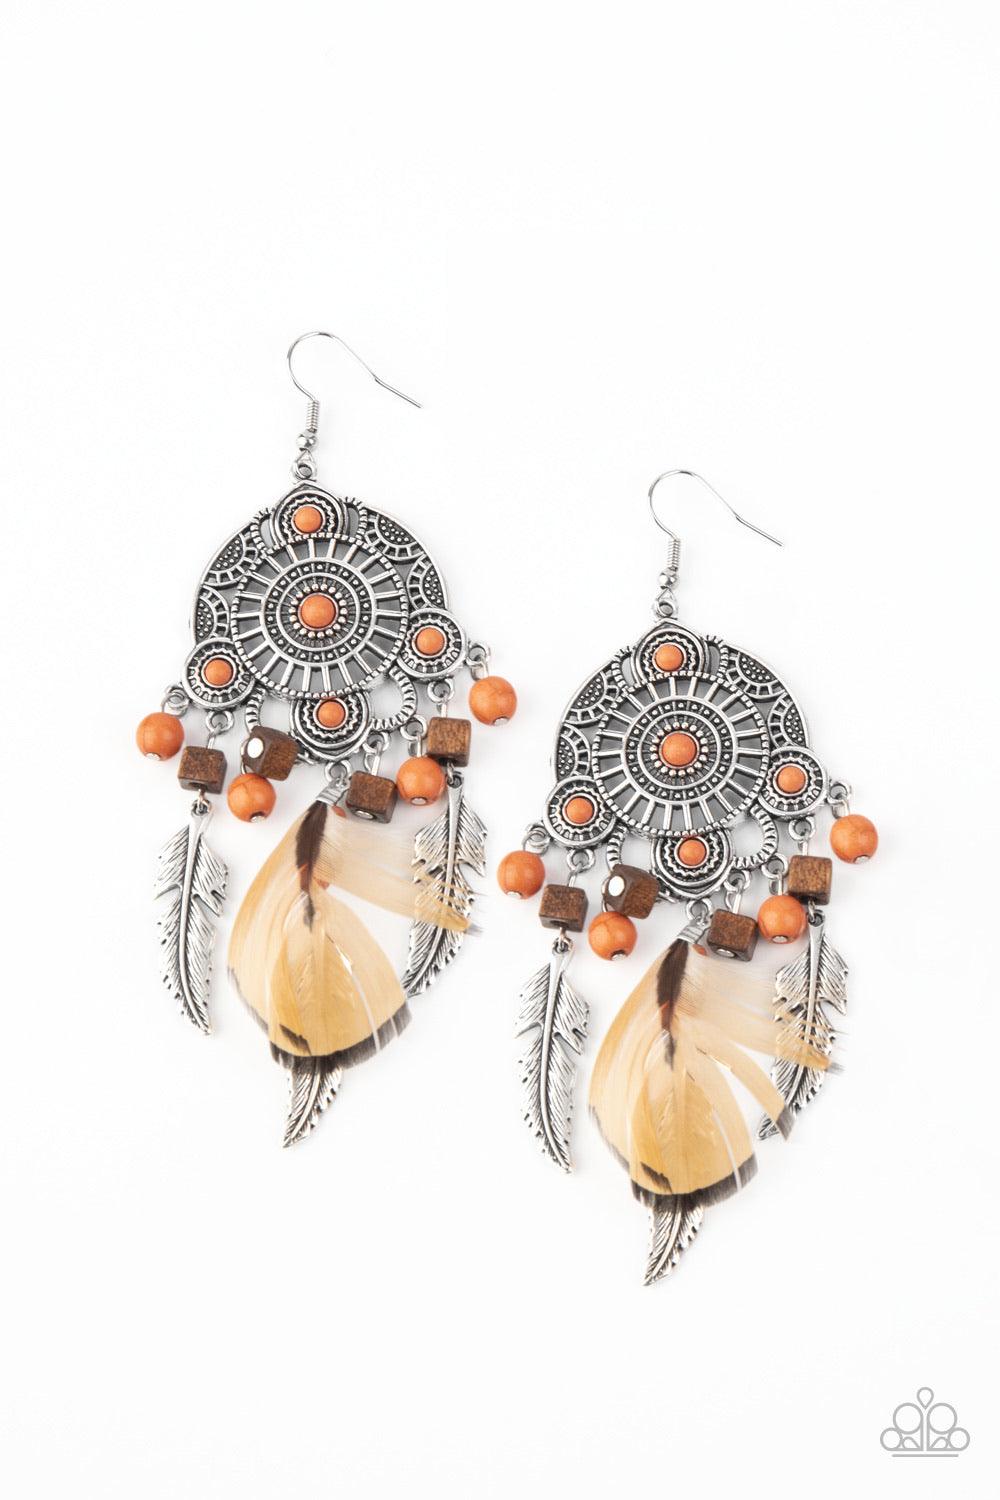 Paparazzi Accessories Desert Plains - Orange Radiating with studded patterns, an orange stone dotted silver frame gives way to a whimsical collection of silver feather charms, wooden cube beads, refreshing orange stones, and a brown feather, creating a wh